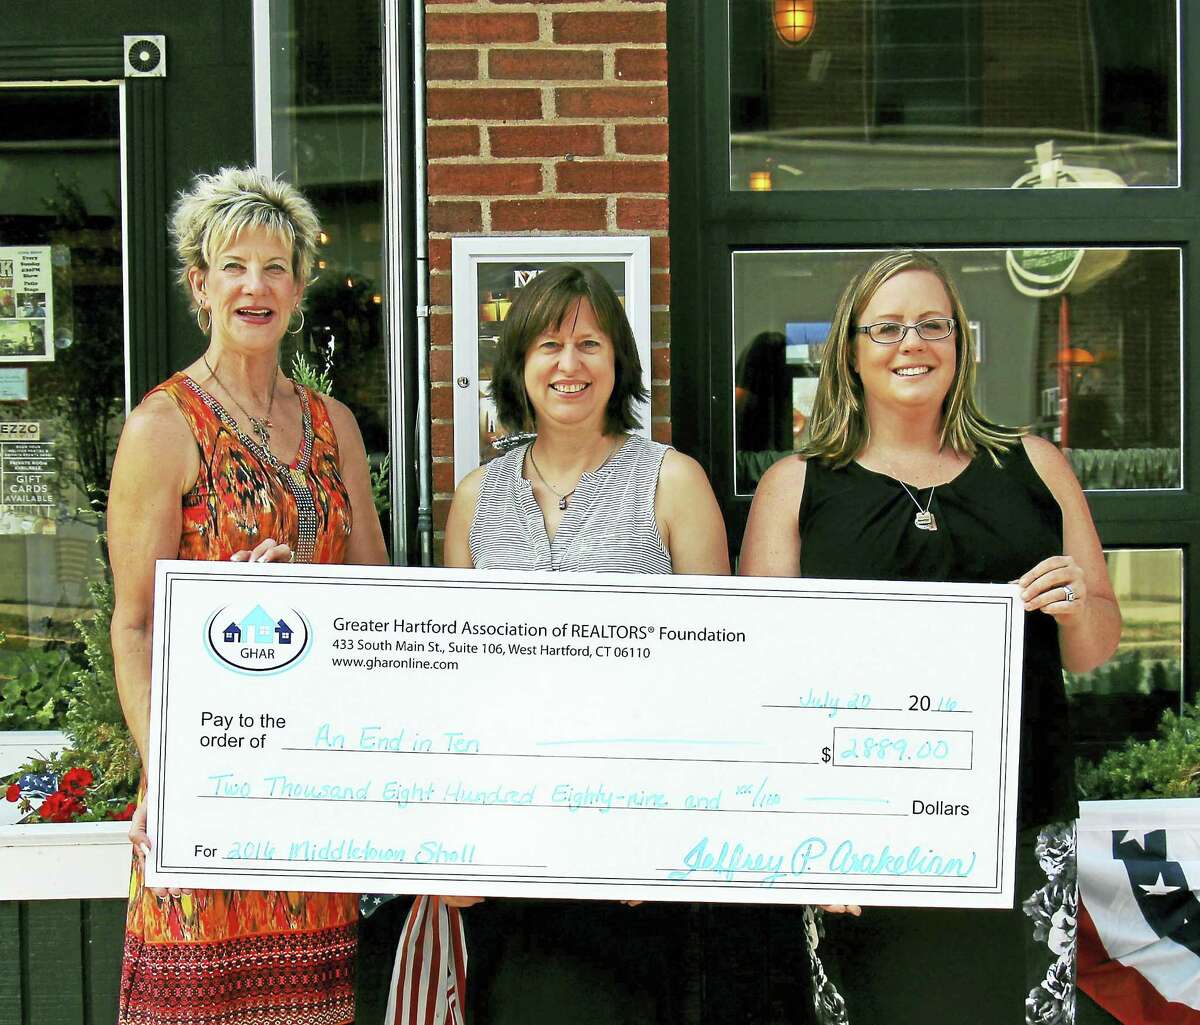 Contributed photo From left are Mary Beth Bain, event sponsor; Ann Foust of MCCHH; and Kaethe Everett, Committee Chair), at the GHAR fundraiser.